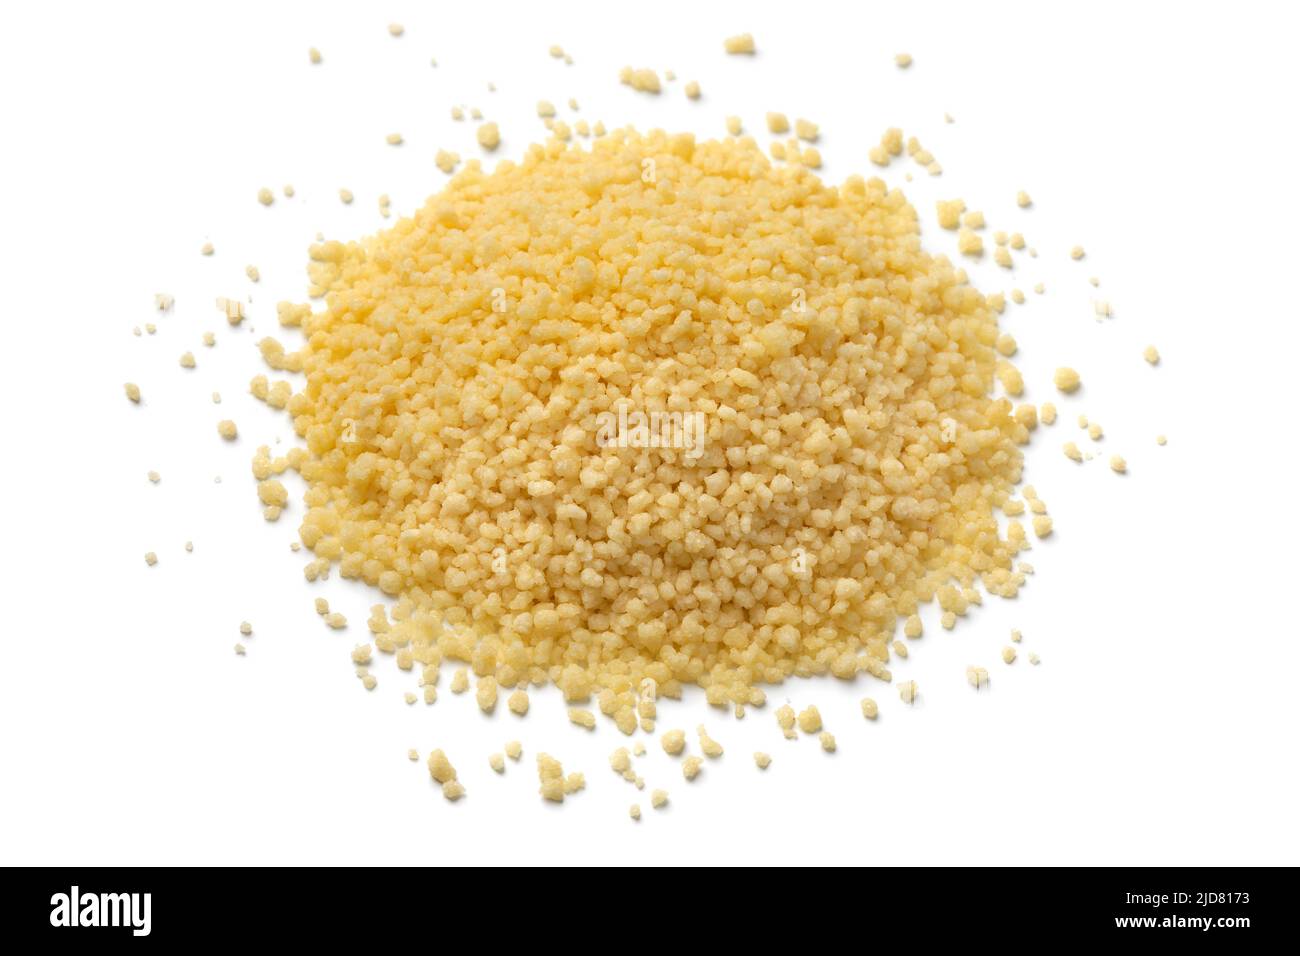 Heap of dried uncooked couscous isolated on white background Stock Photo